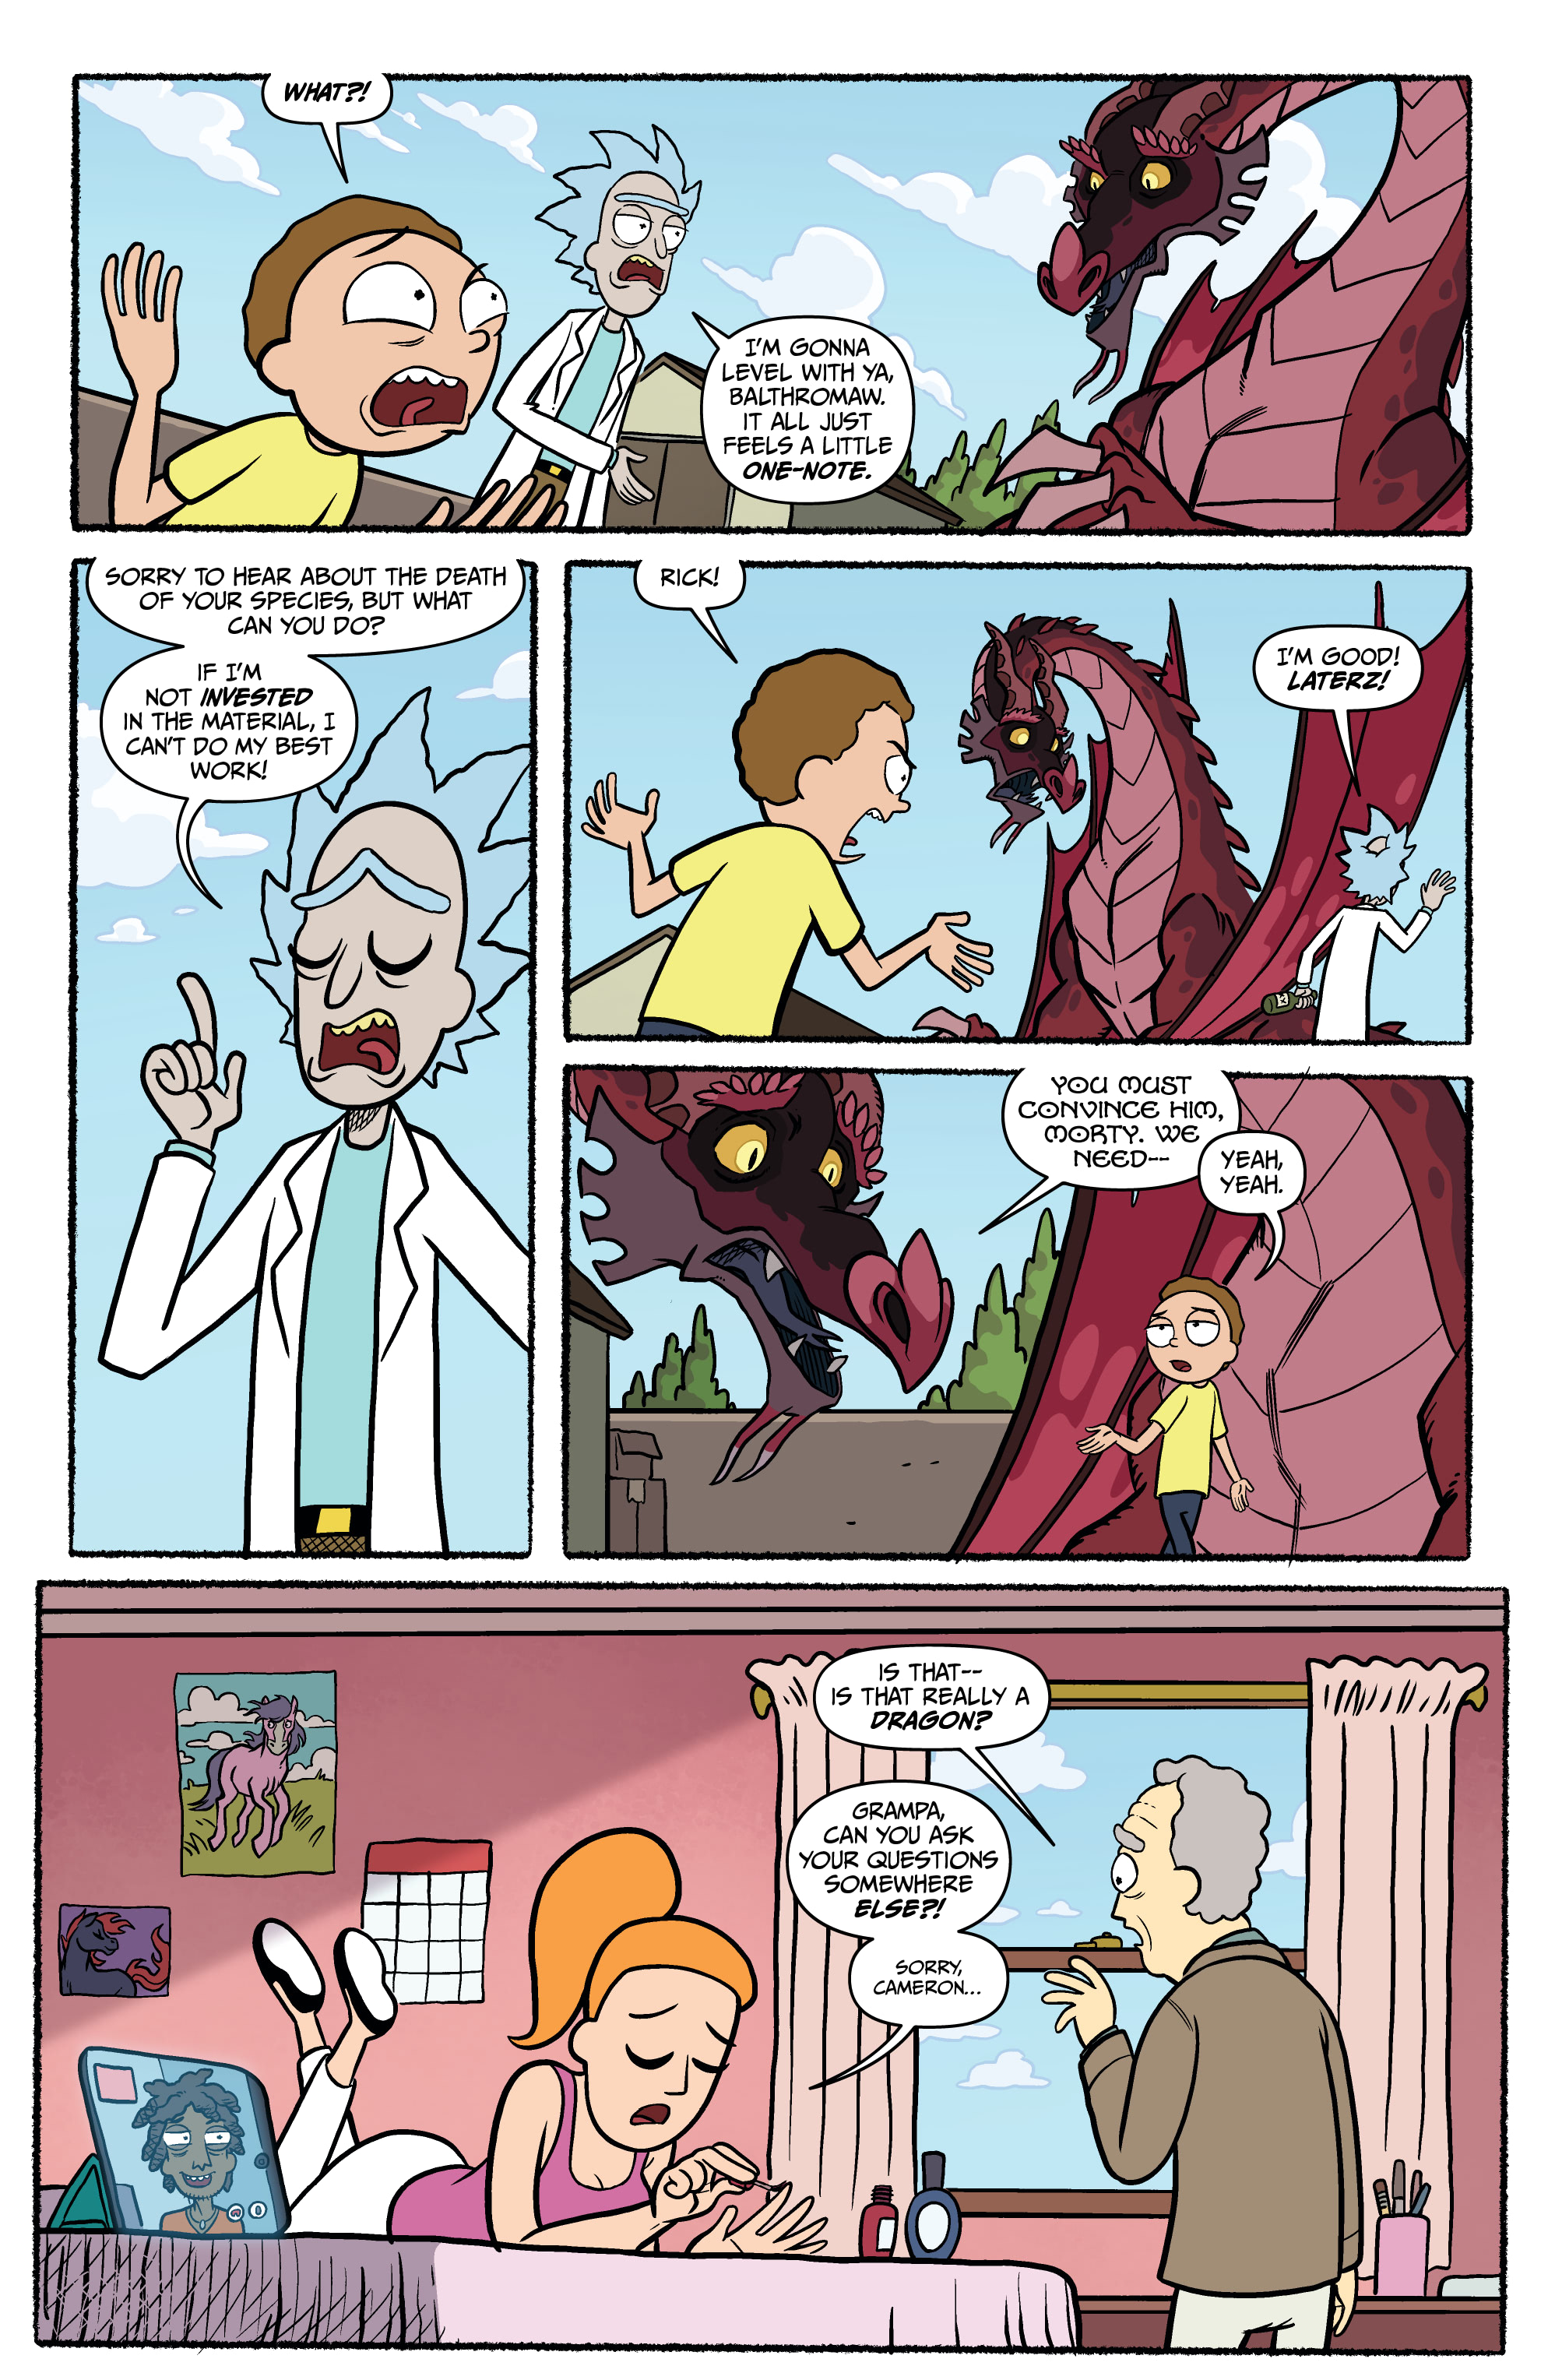 rick-and-morty-worlds-apart-2021-chapter-1-page-14